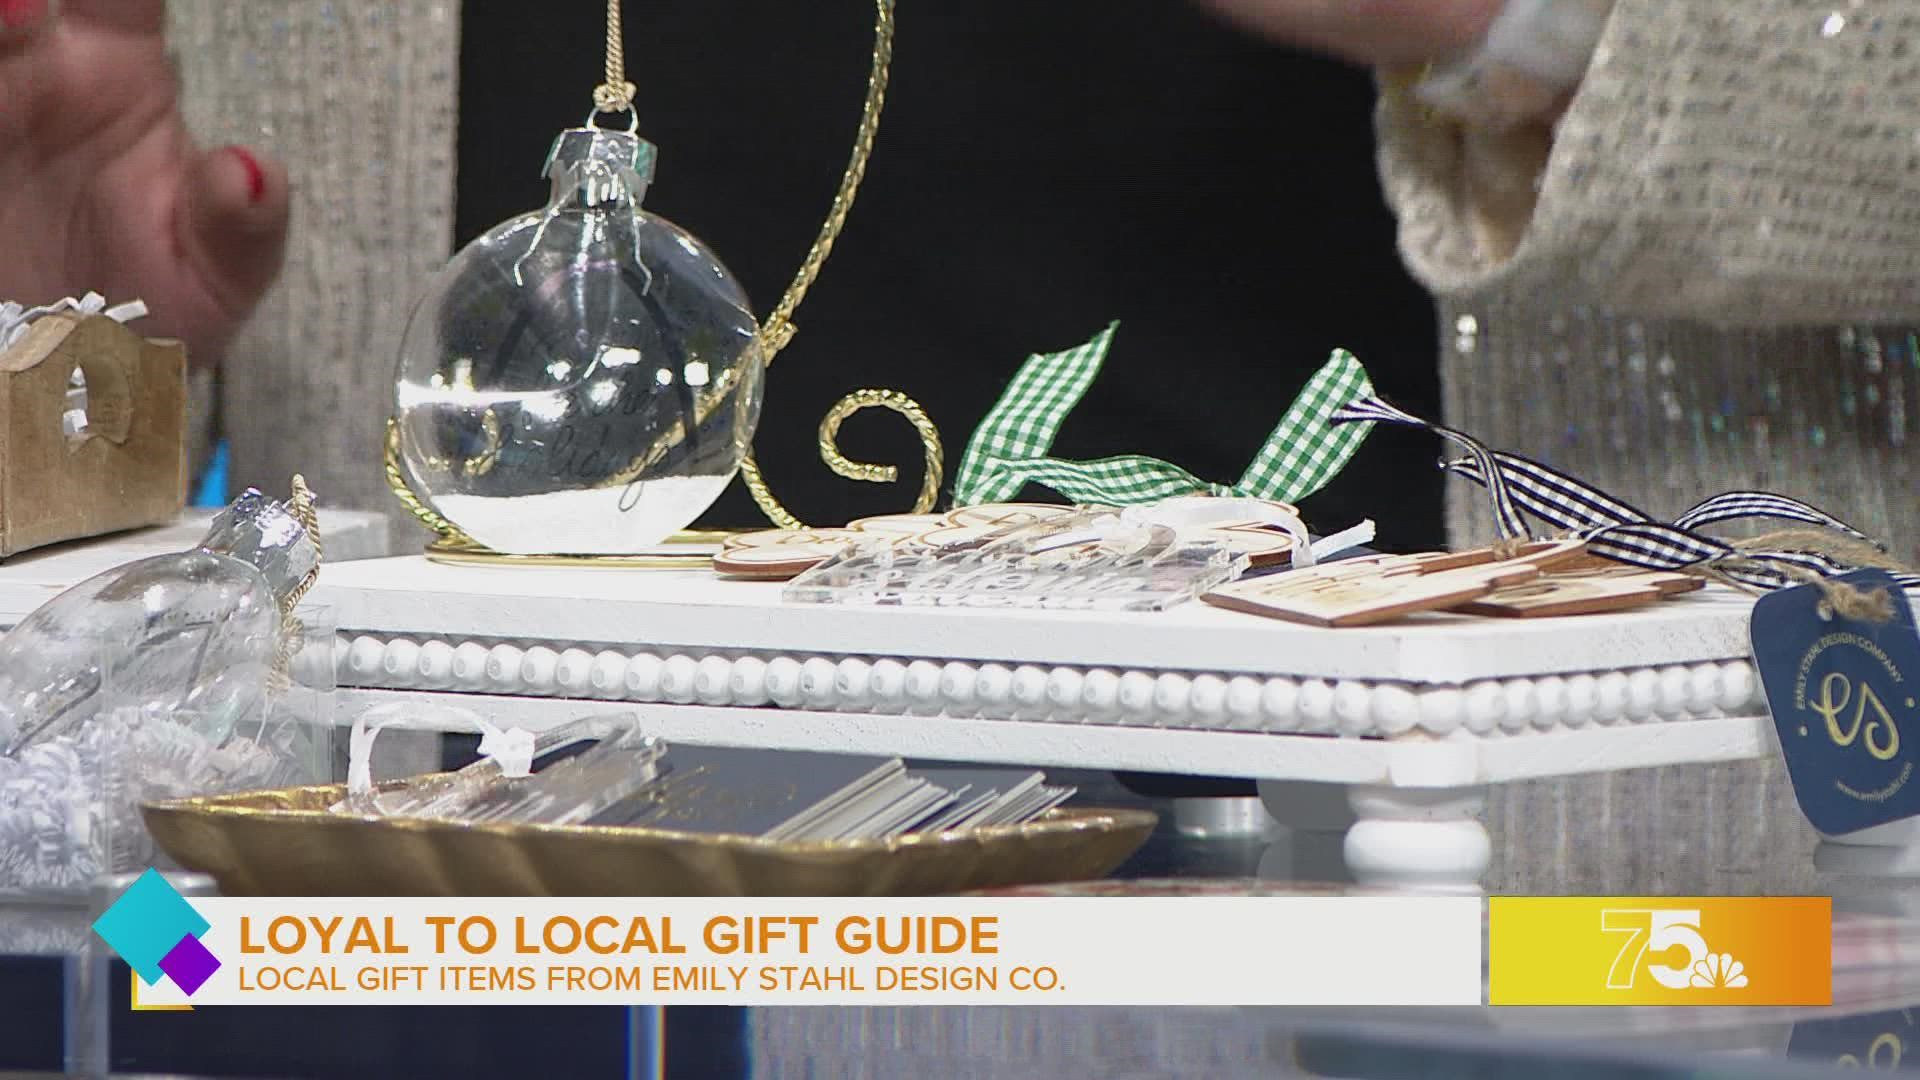 Emily Stahl joined Mary in studio to share her holiday products. Most recently, Stahl added ornaments, hats, tote bags and magnets for the holiday season.